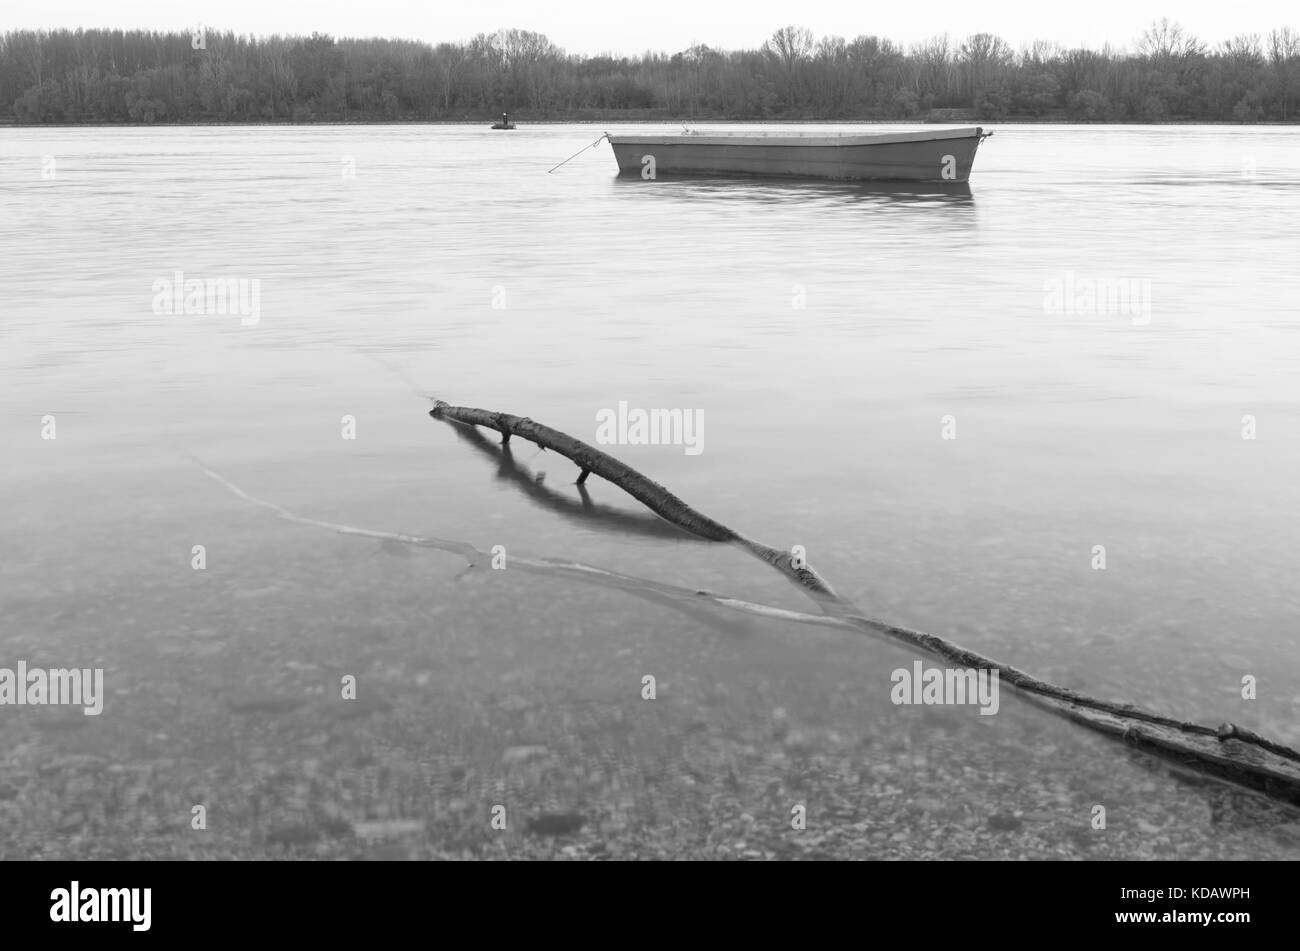 Driftwood and Empty Boat in the Calm Danube Water Stock Photo